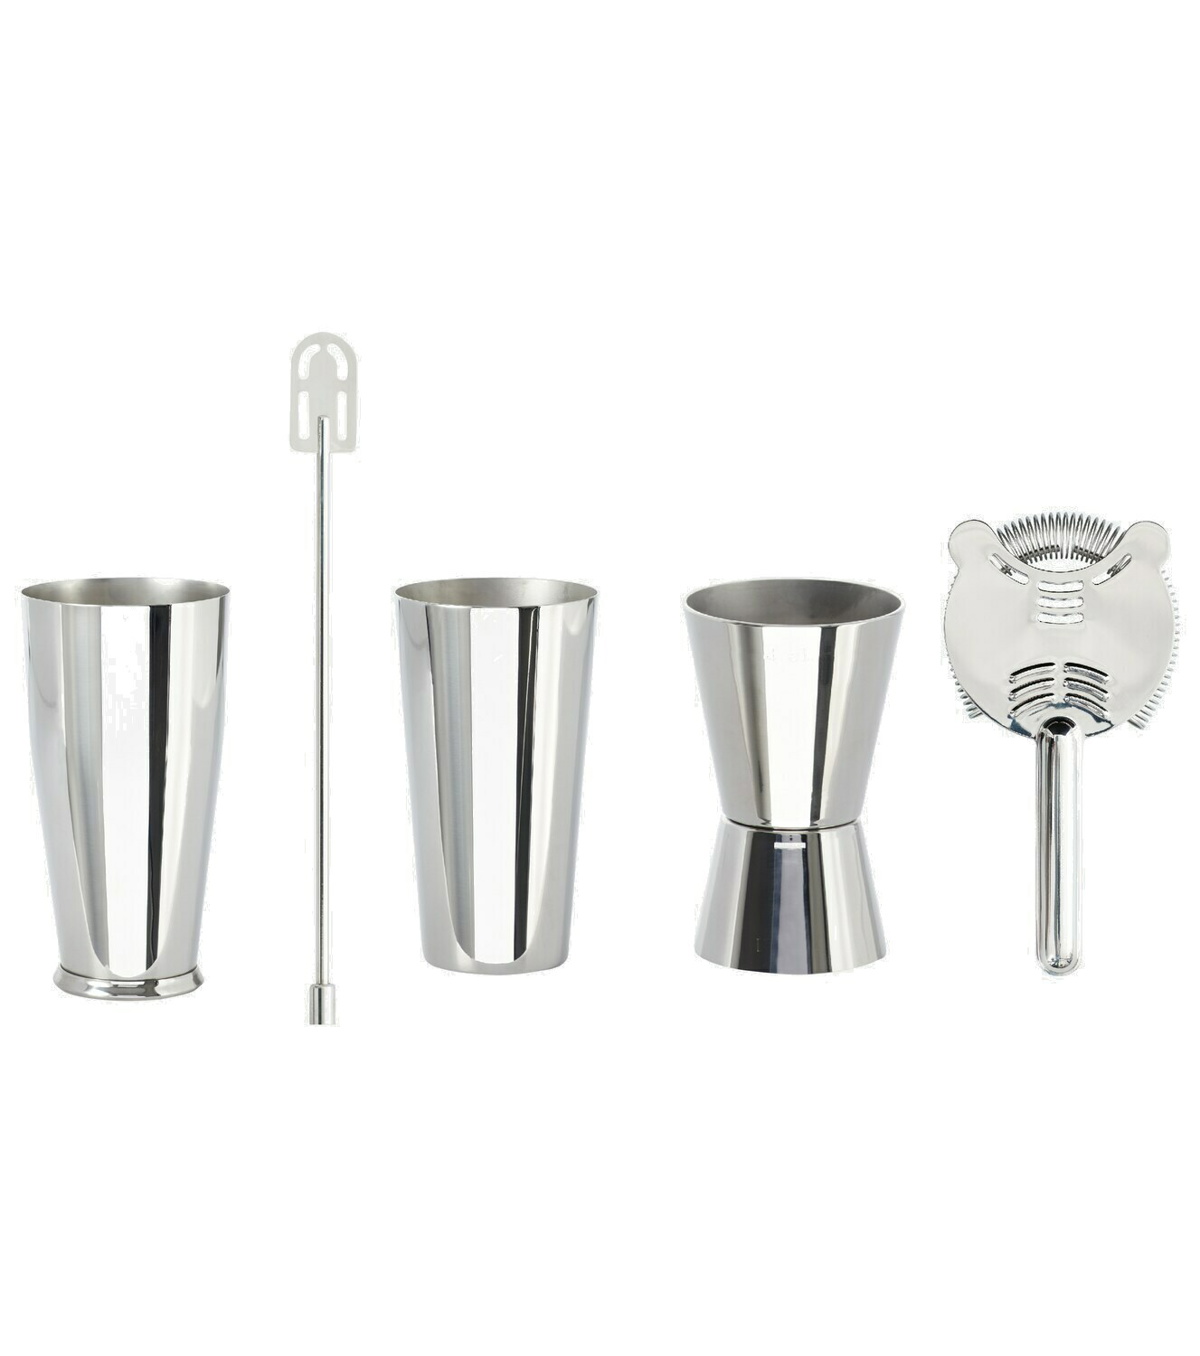 Alessi - Boston shaker set by Ettore Sottsass Alessi